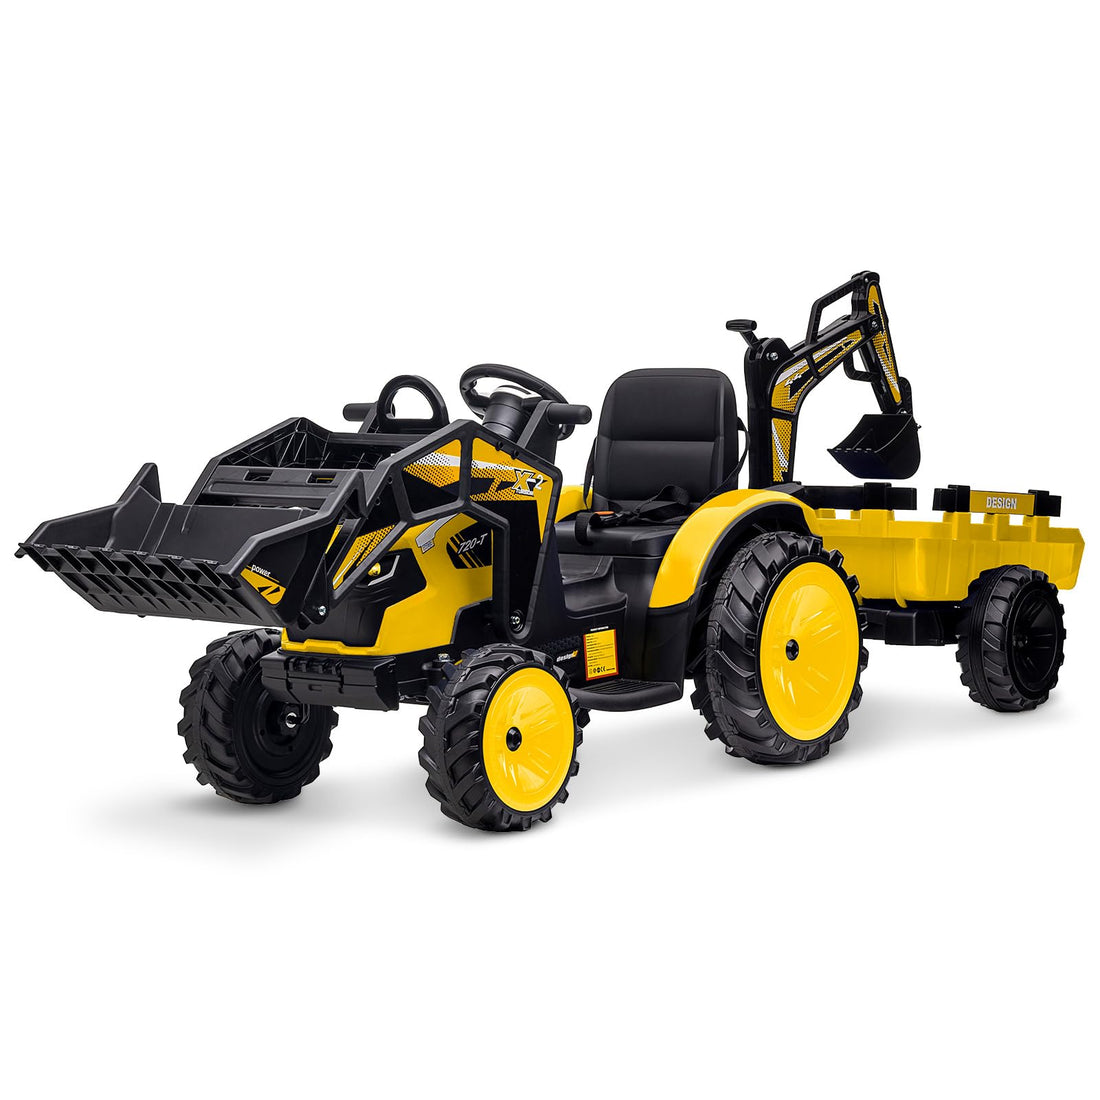 3 in 1 Ride on Tractor, Excavator & Bulldozer, 24V Electric Vehicle w/Trailer, Shovel Bucket, Digger, Remote Control, EVA Tire, LED Light, Music, USB & Bluetooth, Kids Ride on Car, Bright Yellow